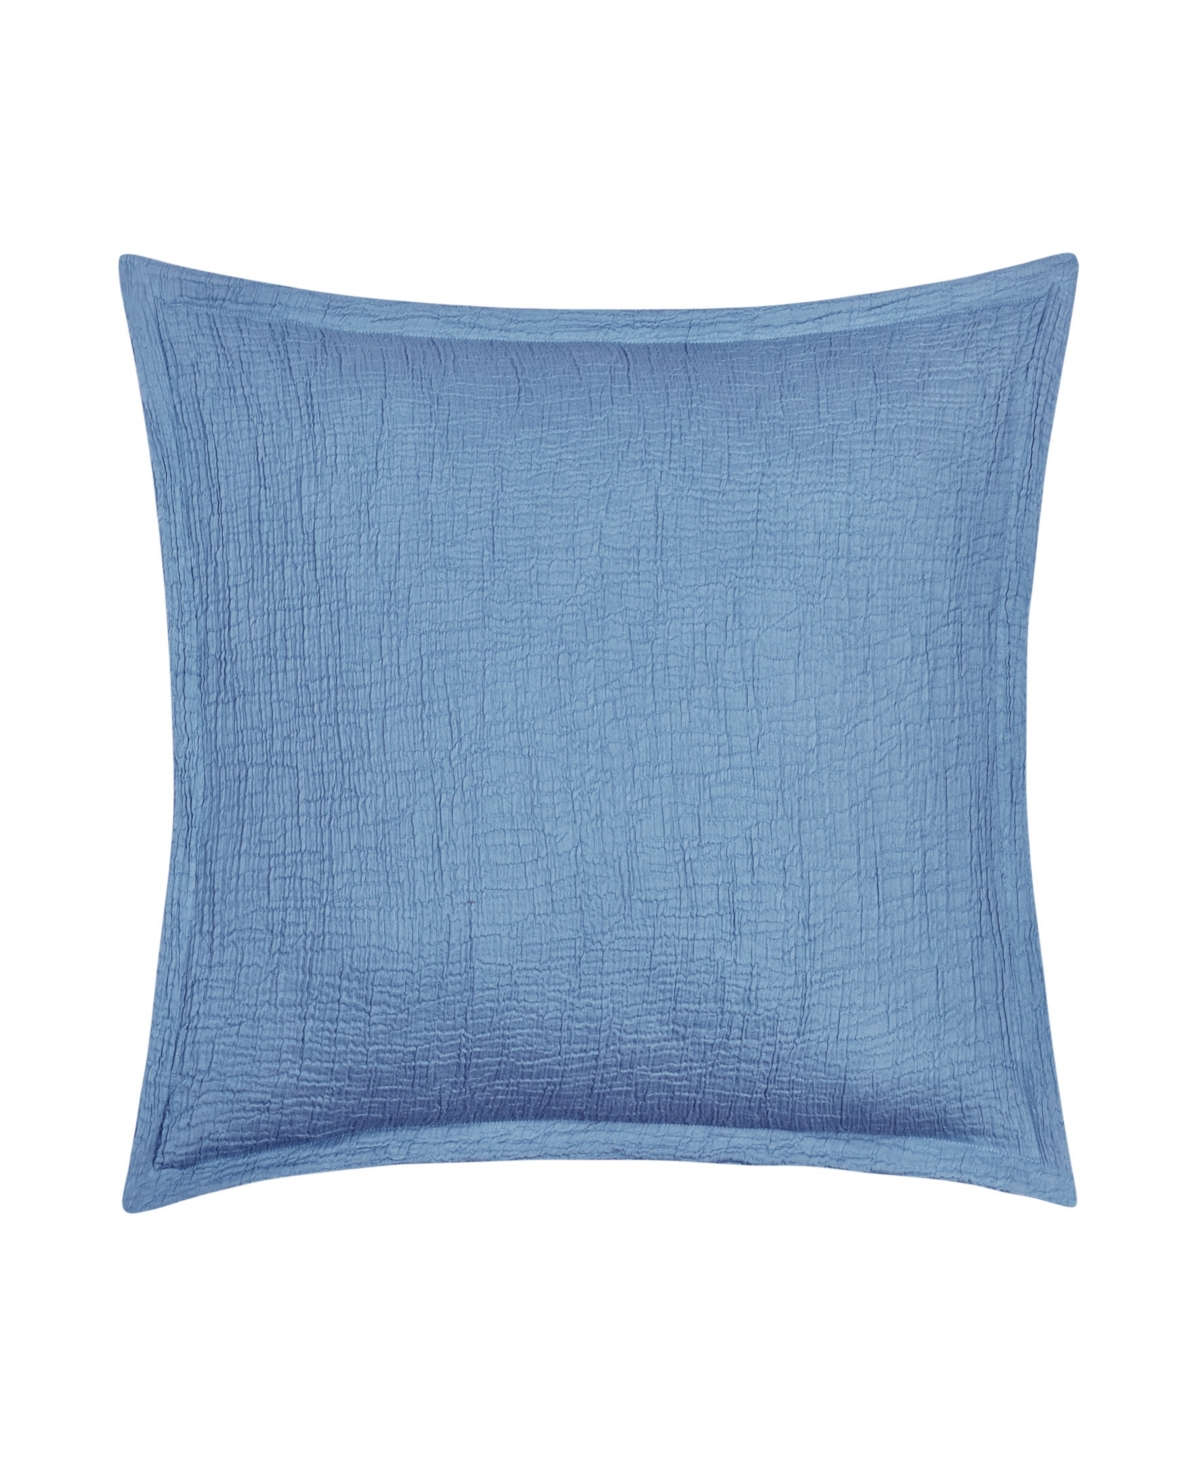 White Sand South Seas Square Decorative Pillow Cover, 20" X 20" In Blue